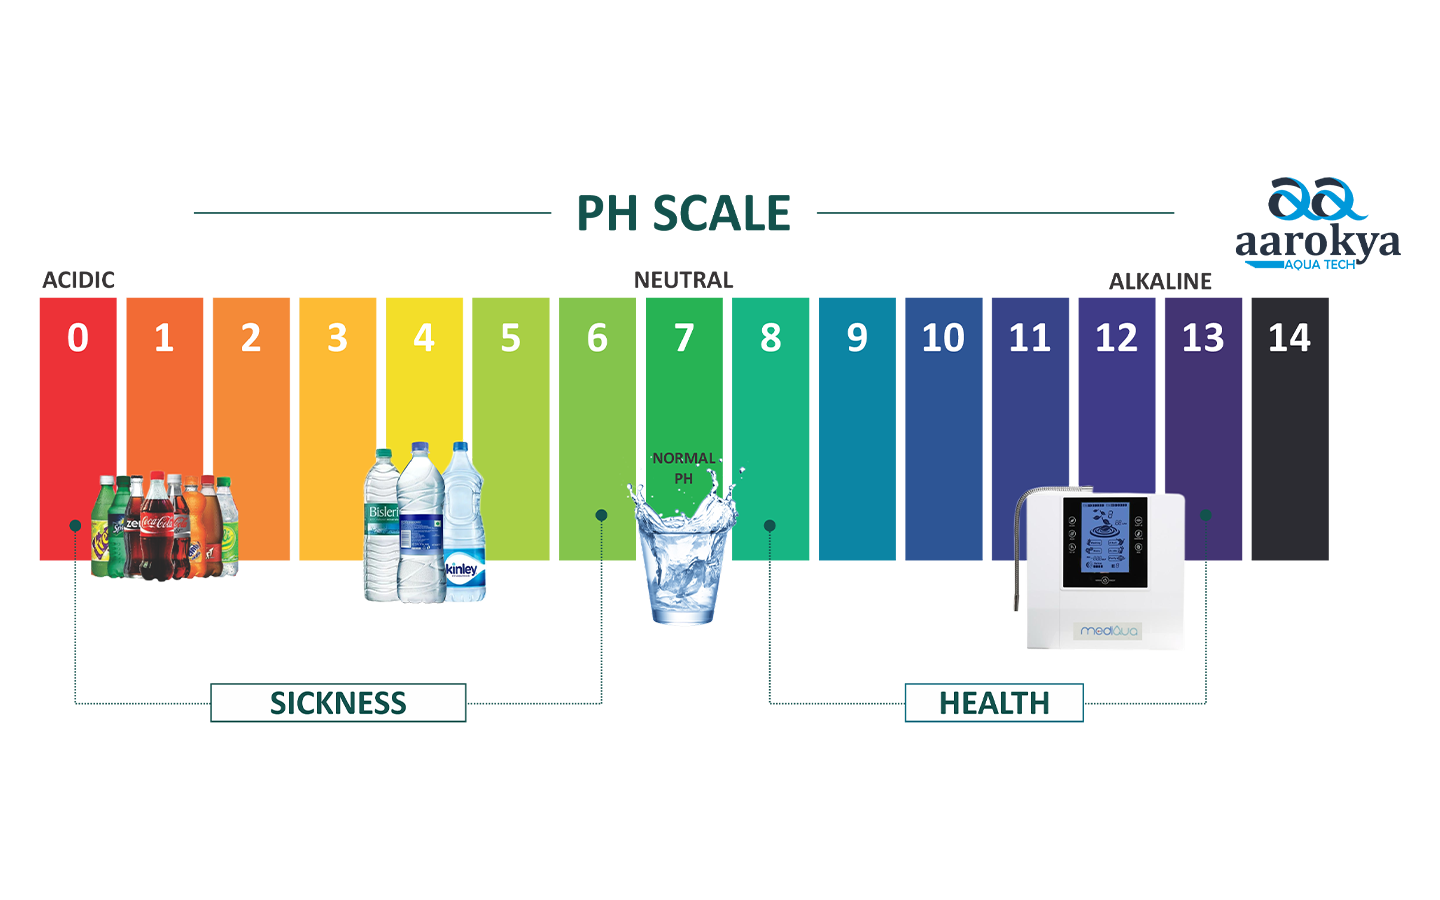 PH Scale for Measuring Acidity or Alkalinity